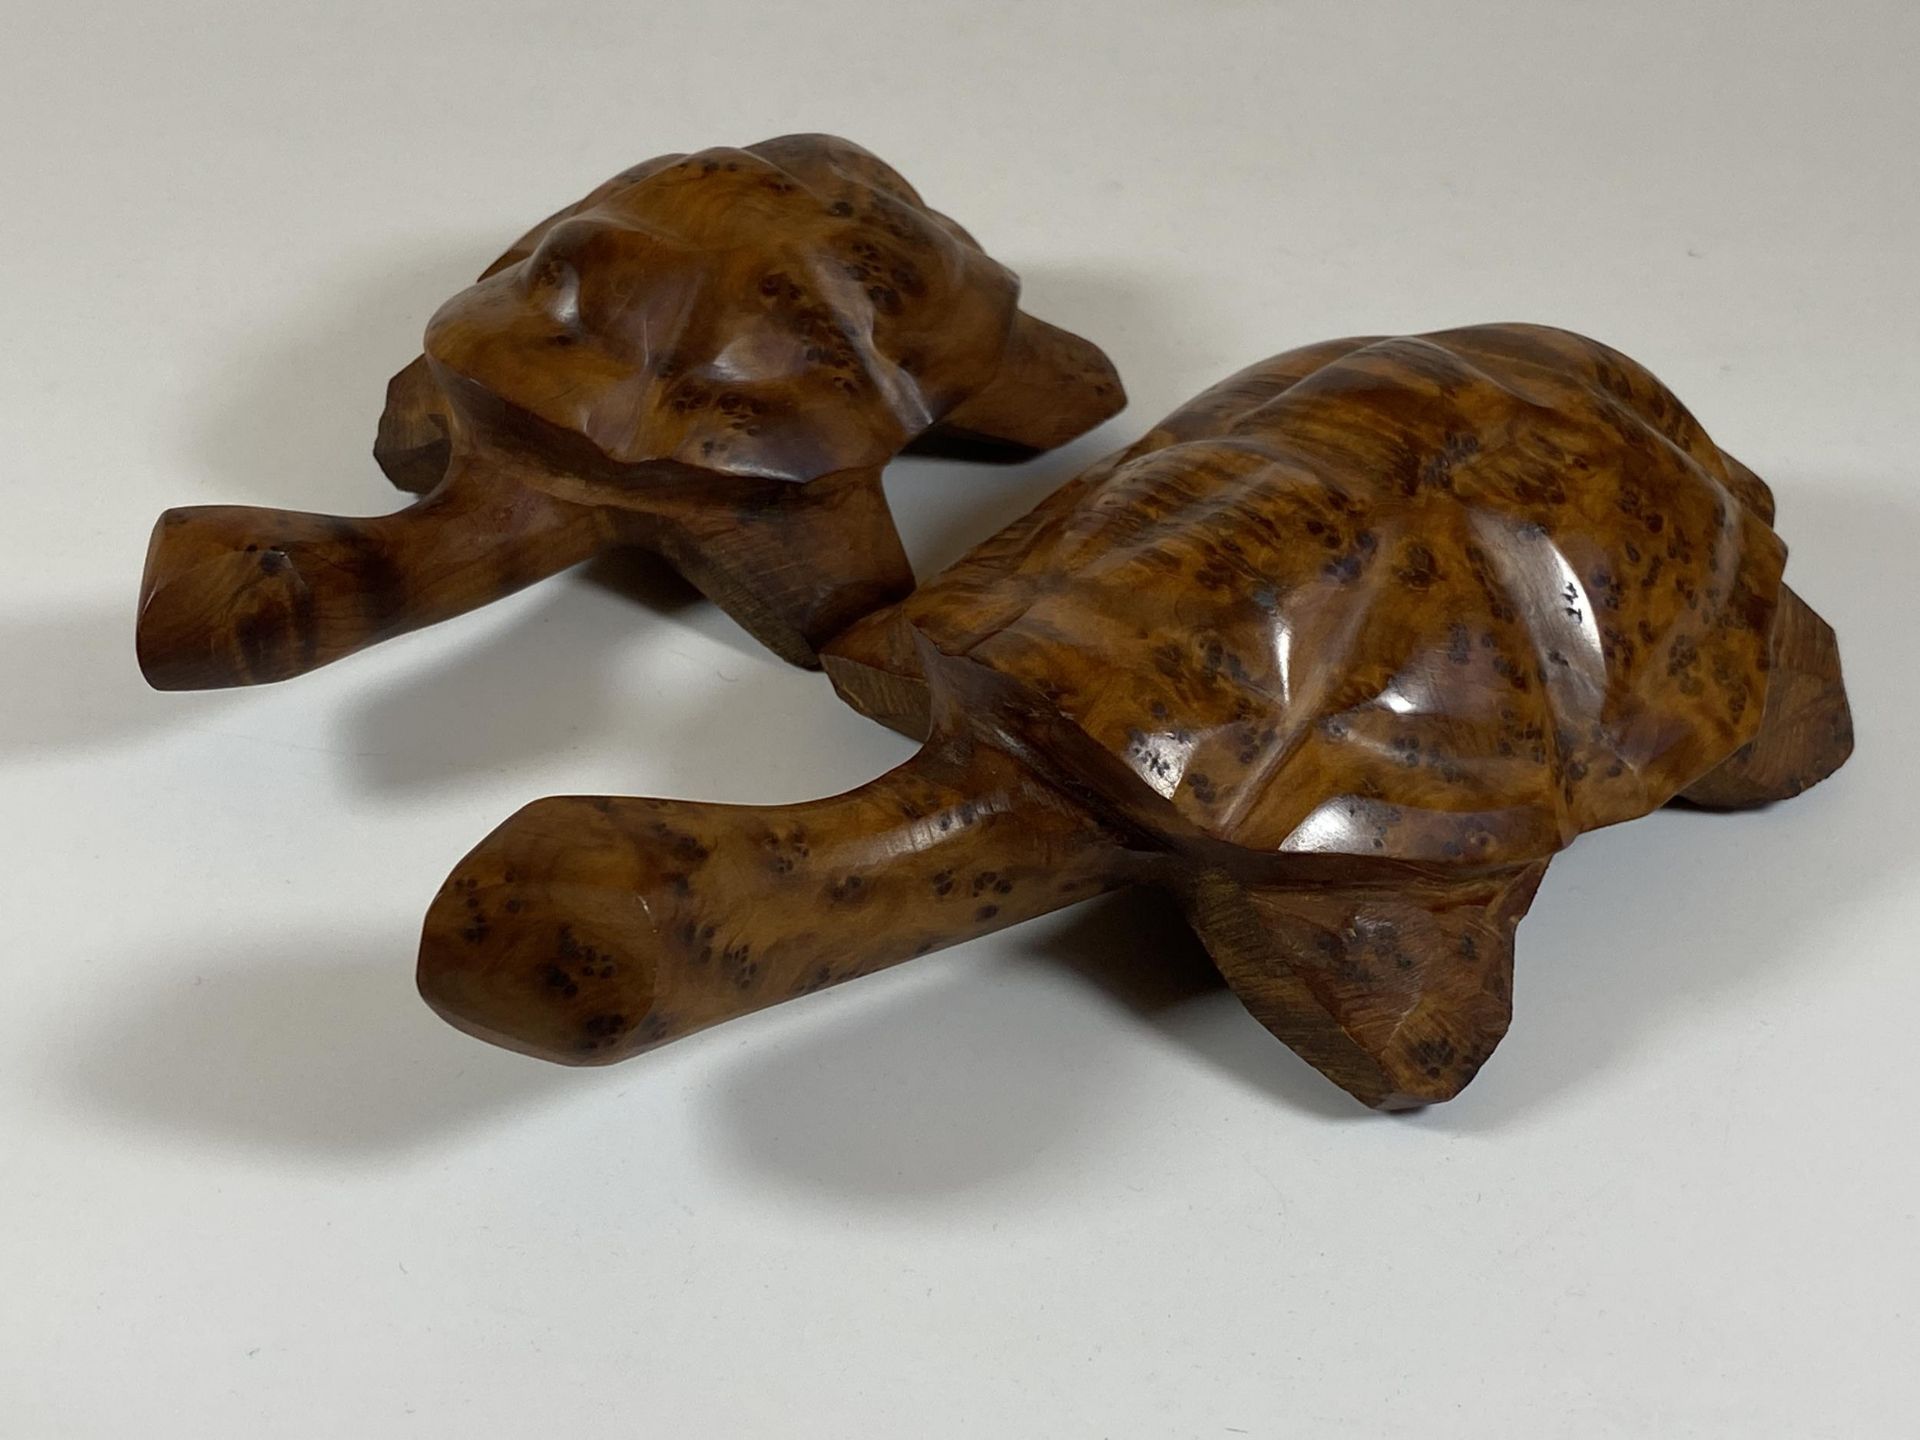 A PAIR OF WALNUT EFFECT WOODEN TURTLES, LENGTH 18CM - Image 2 of 4